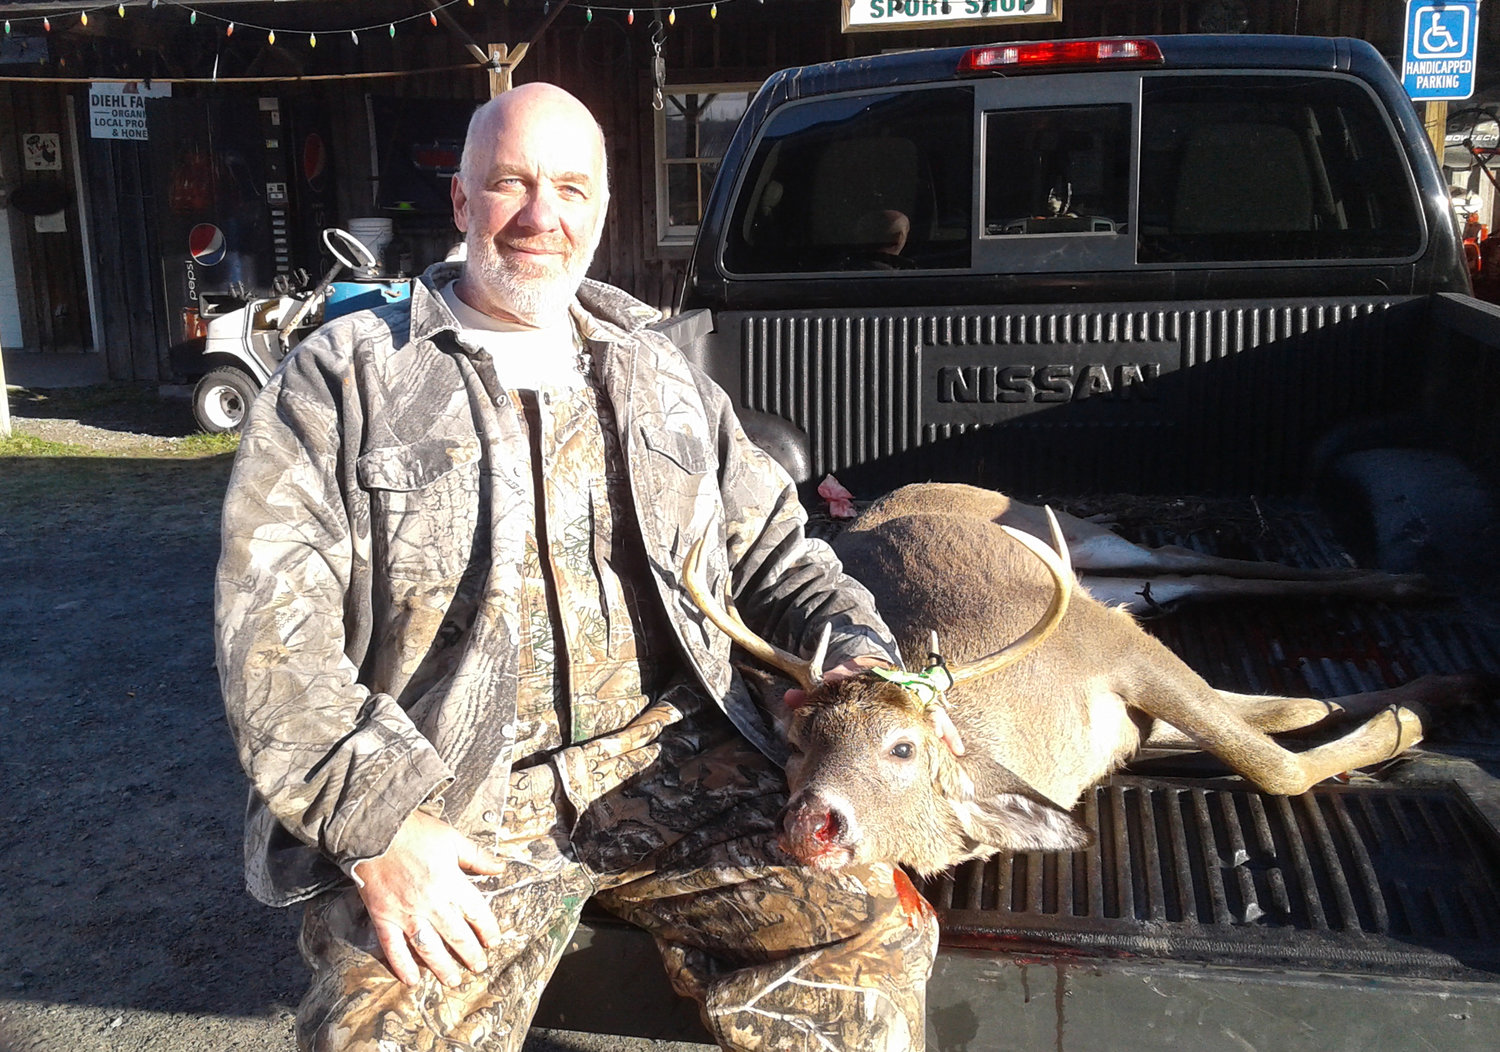 Jim Caruso of Youngsville harvested this buck that scored a 56.75. The 8-pointer weighed 135 pounds and was taken in the Town of Callicoon on November 20. The buck has 16 and 16.25-inch beams to go along with a 16.5-inch spread.